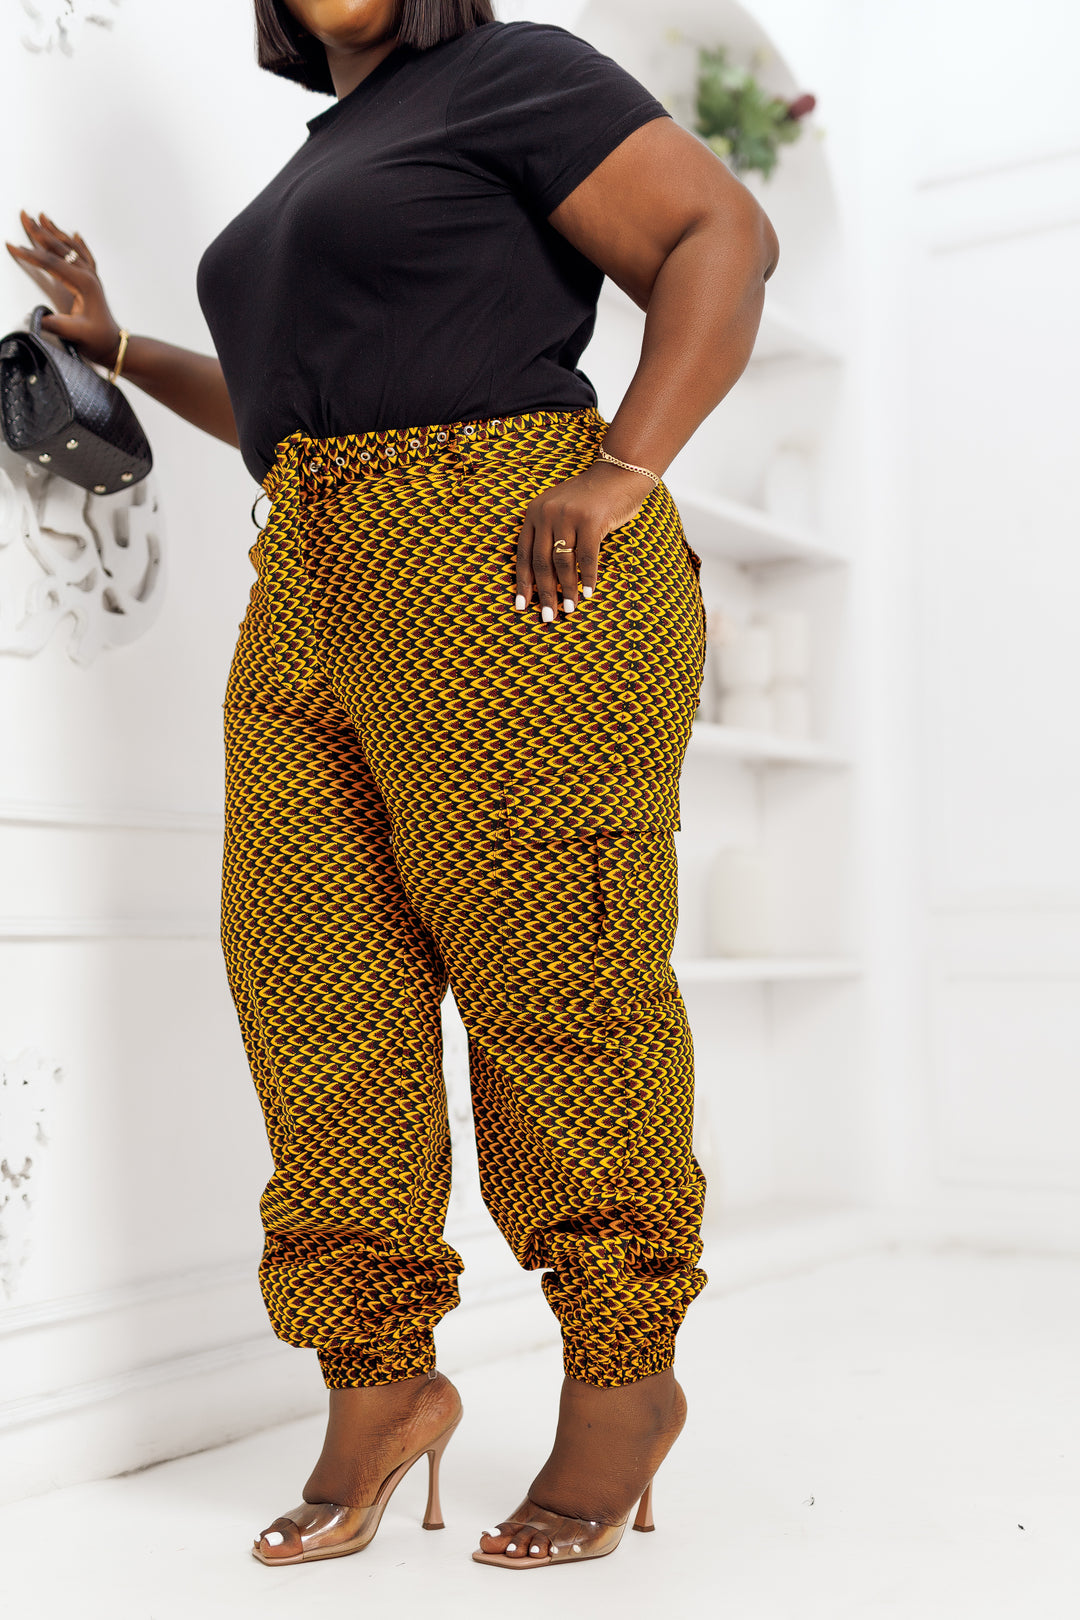 FUNBI AFRICAN PRINT JOGGERS PRE-ORDER [Ships on or before MAY 24TH]